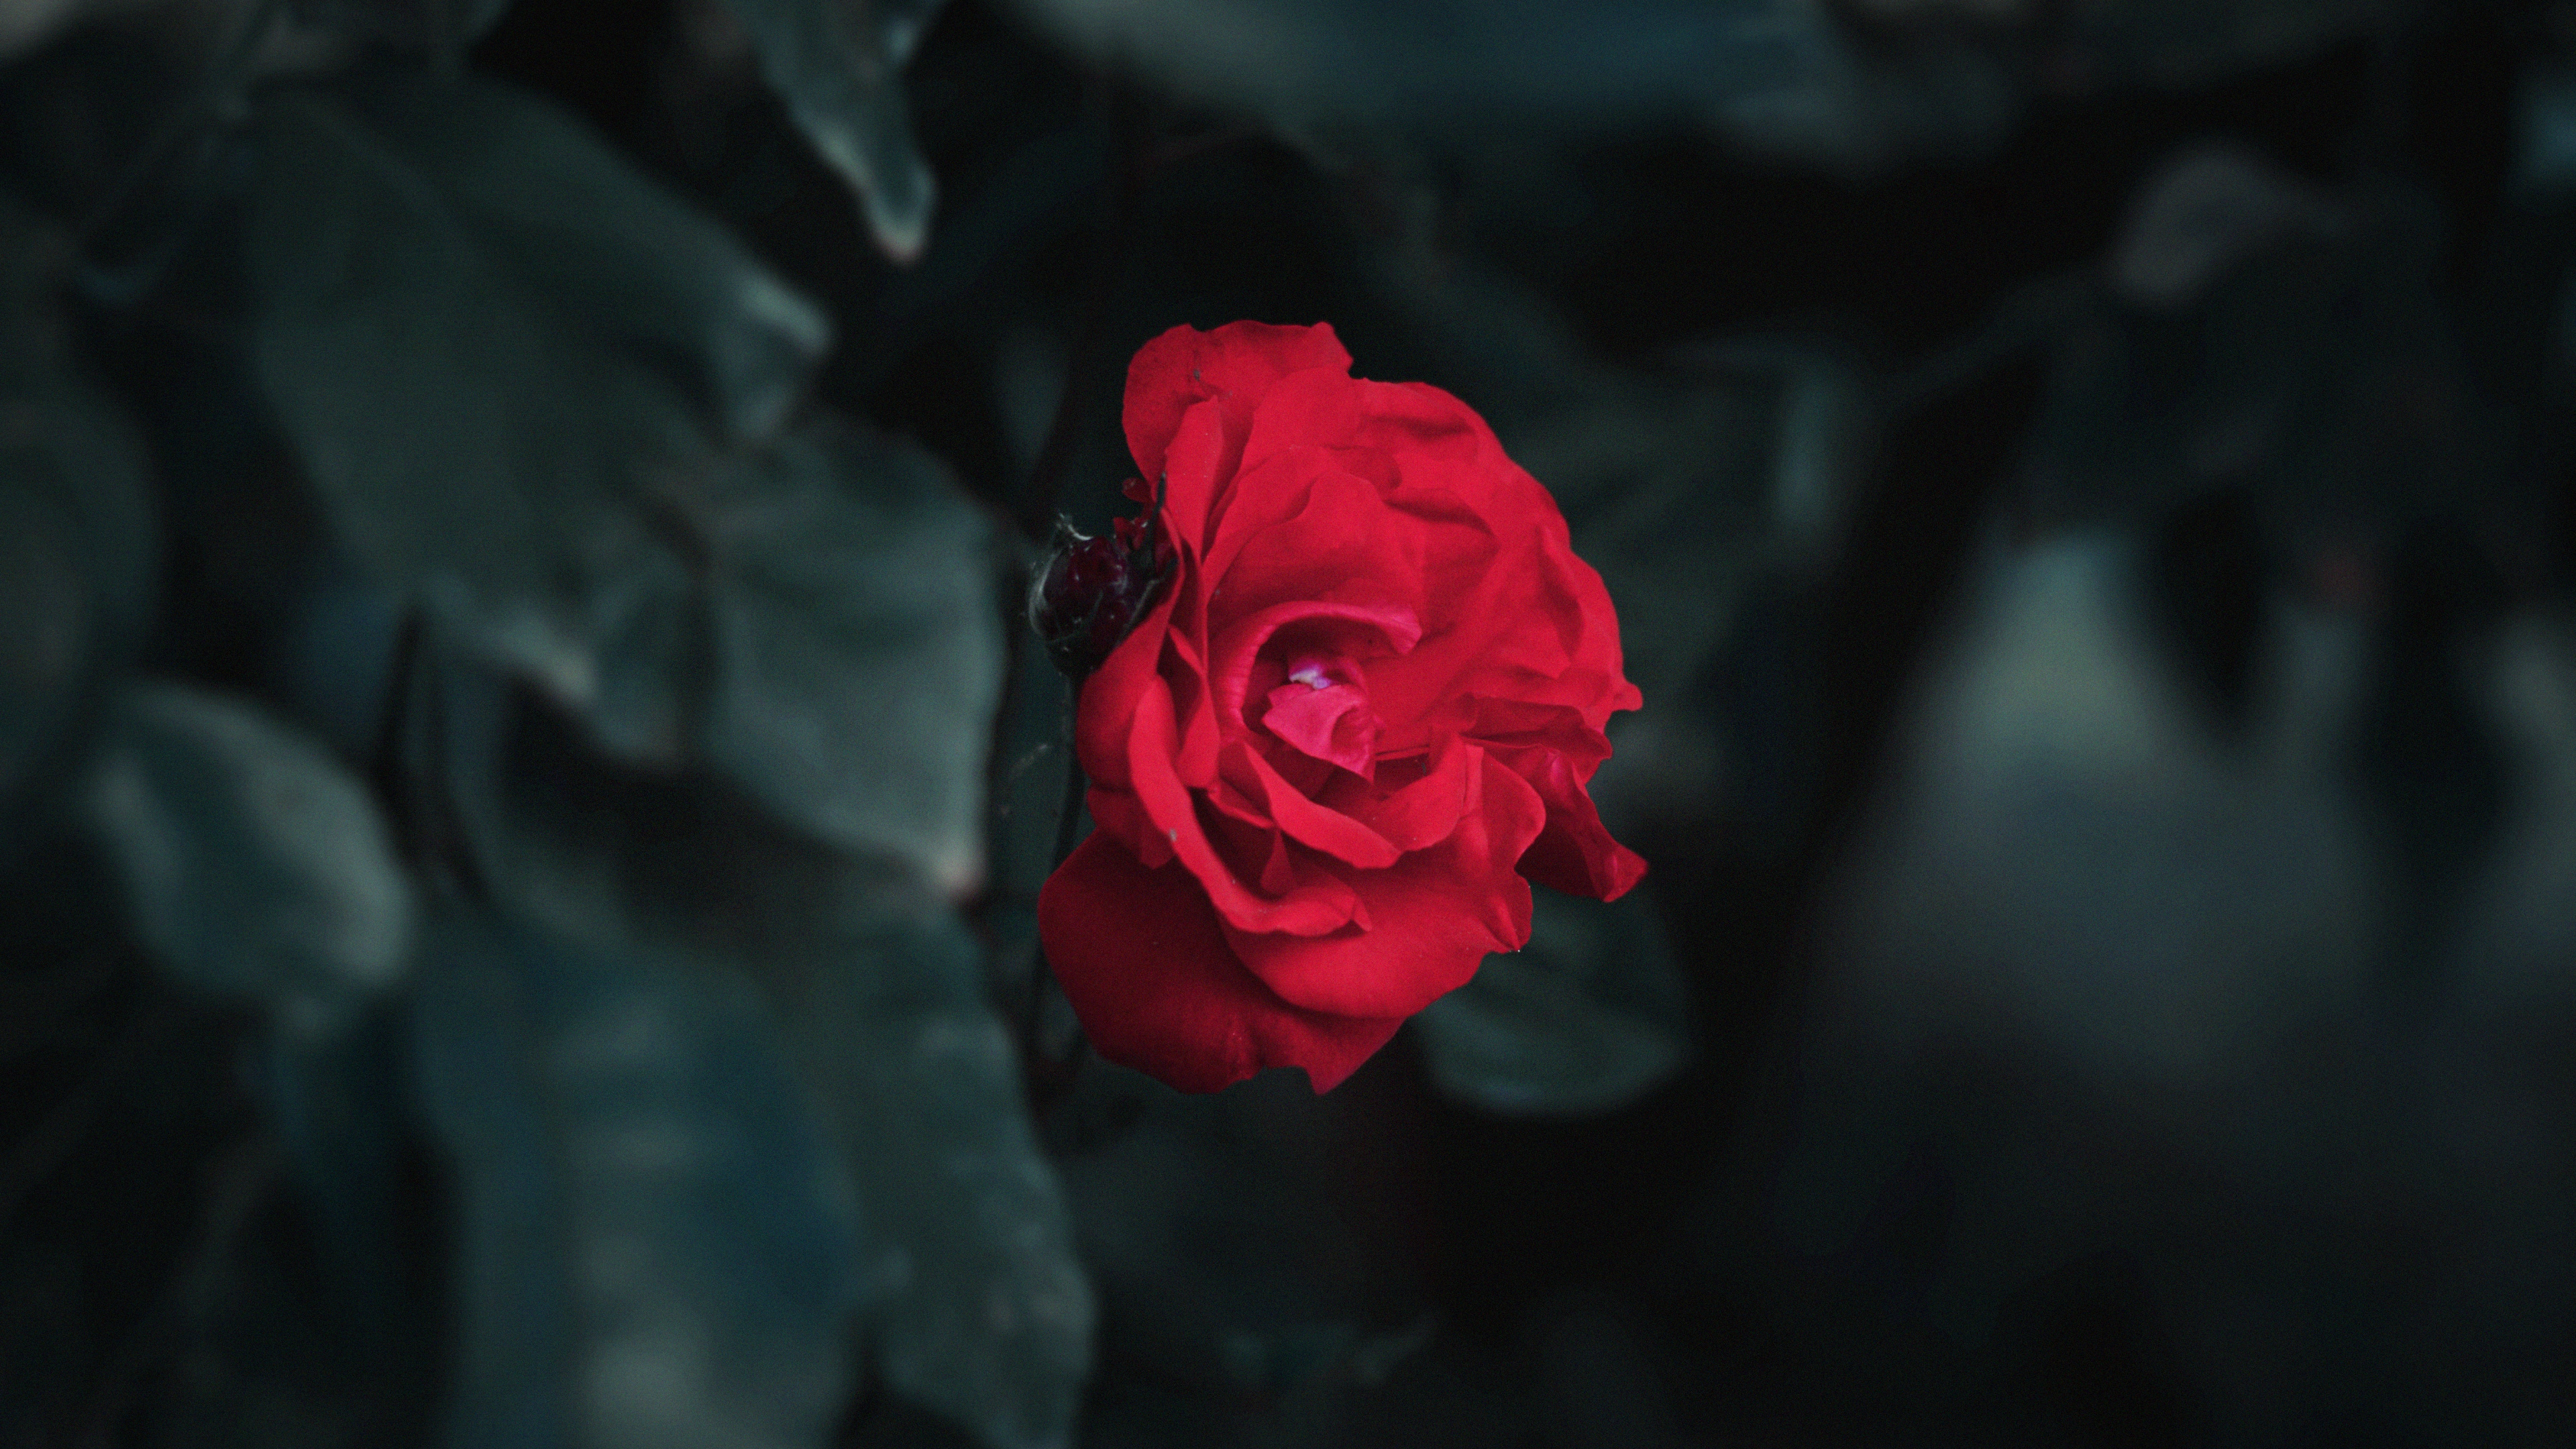 Red Rose in Close up Photography. Wallpaper in 3840x2160 Resolution